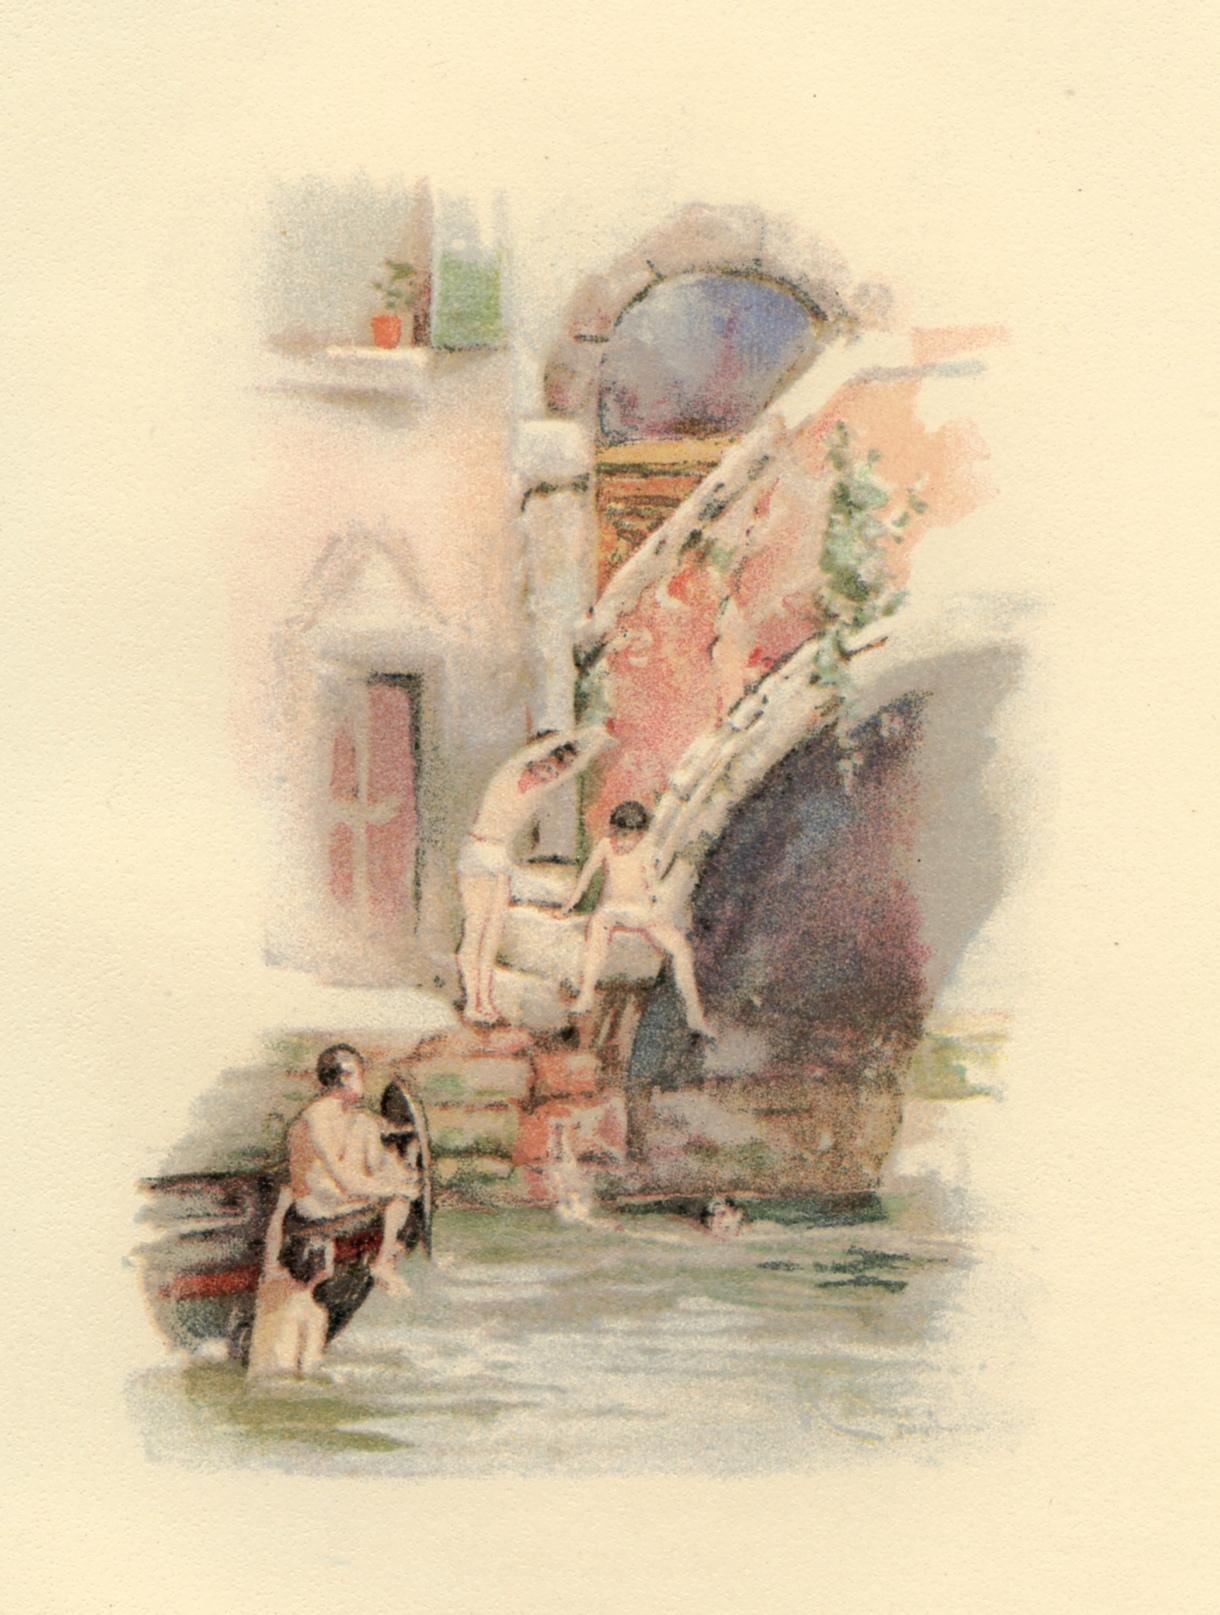 Medium: chromolithograph (after the watercolor). This delightful antique lithograph was published in a small edition in 1892 to illustrate a rare volume with scenes of Venetian life. A beautiful impression printed on cream wove paper. Image size: 3